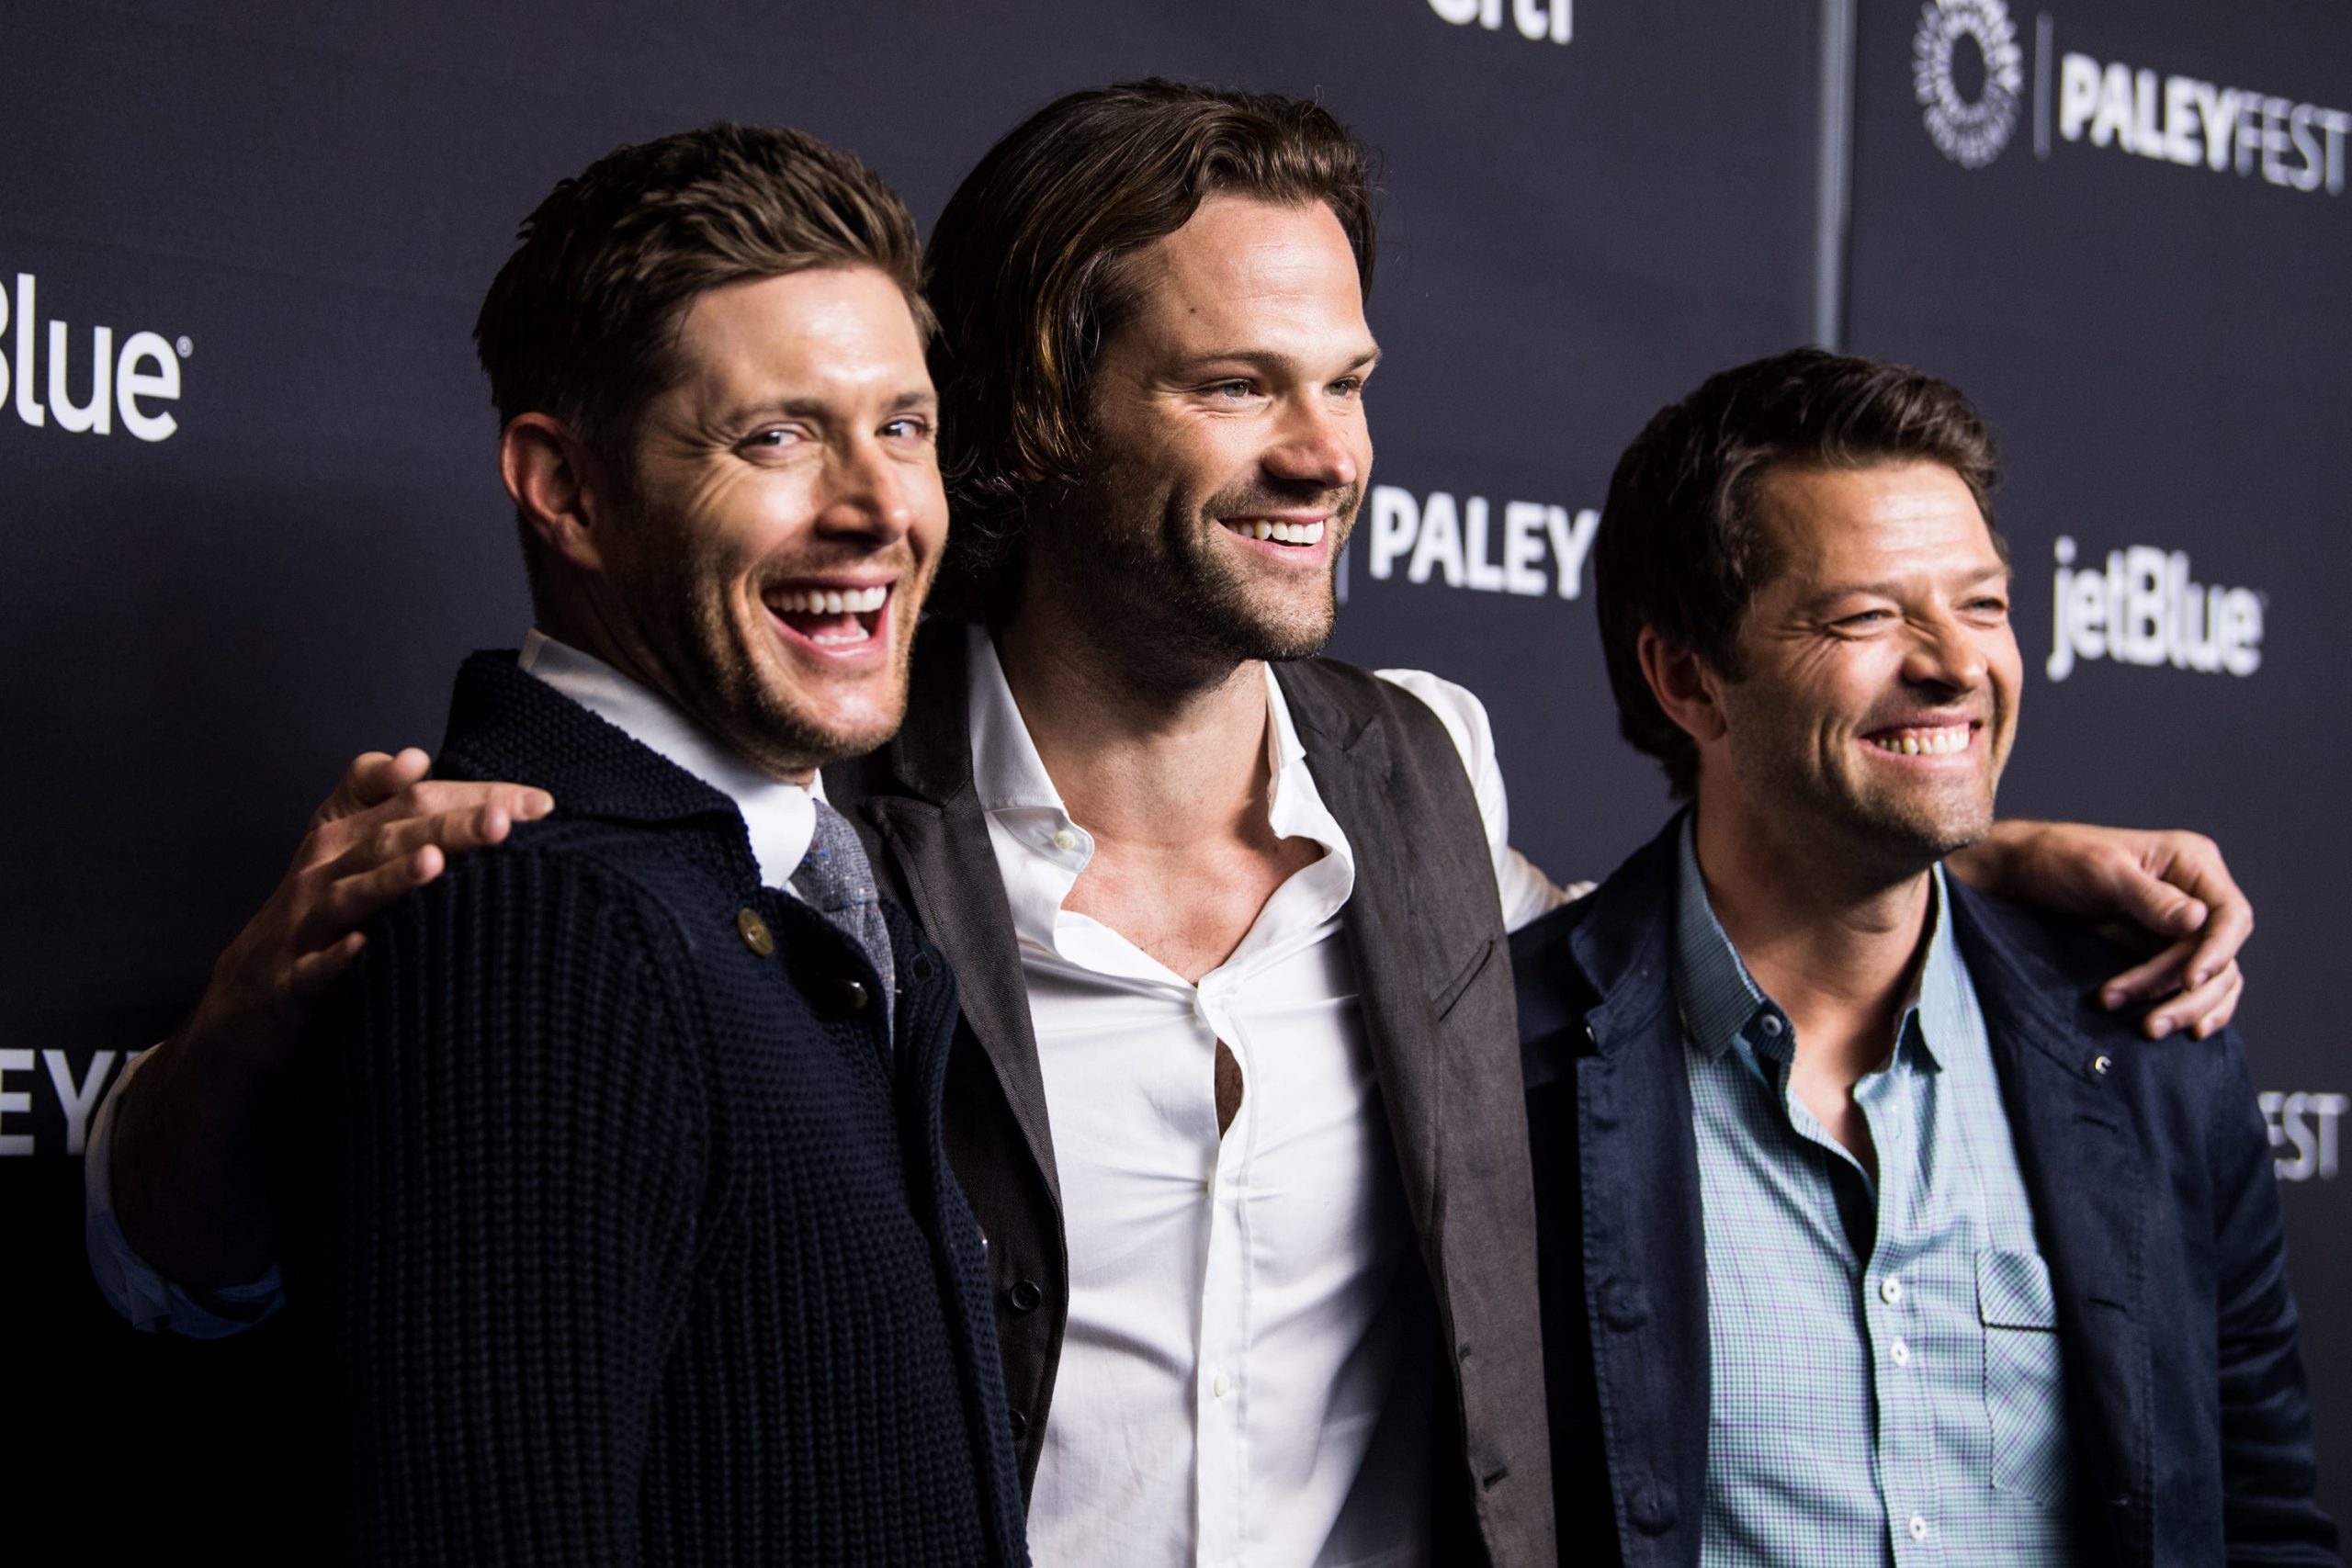 Actors Jensen Ackles, Jared Padalecki and Misha Collins attend the Paley Center for Media's 35th Annual PaleyFest Los Angeles "Supernatural" at Dolby Theatre on March 20, 2018 in Hollywood, California.